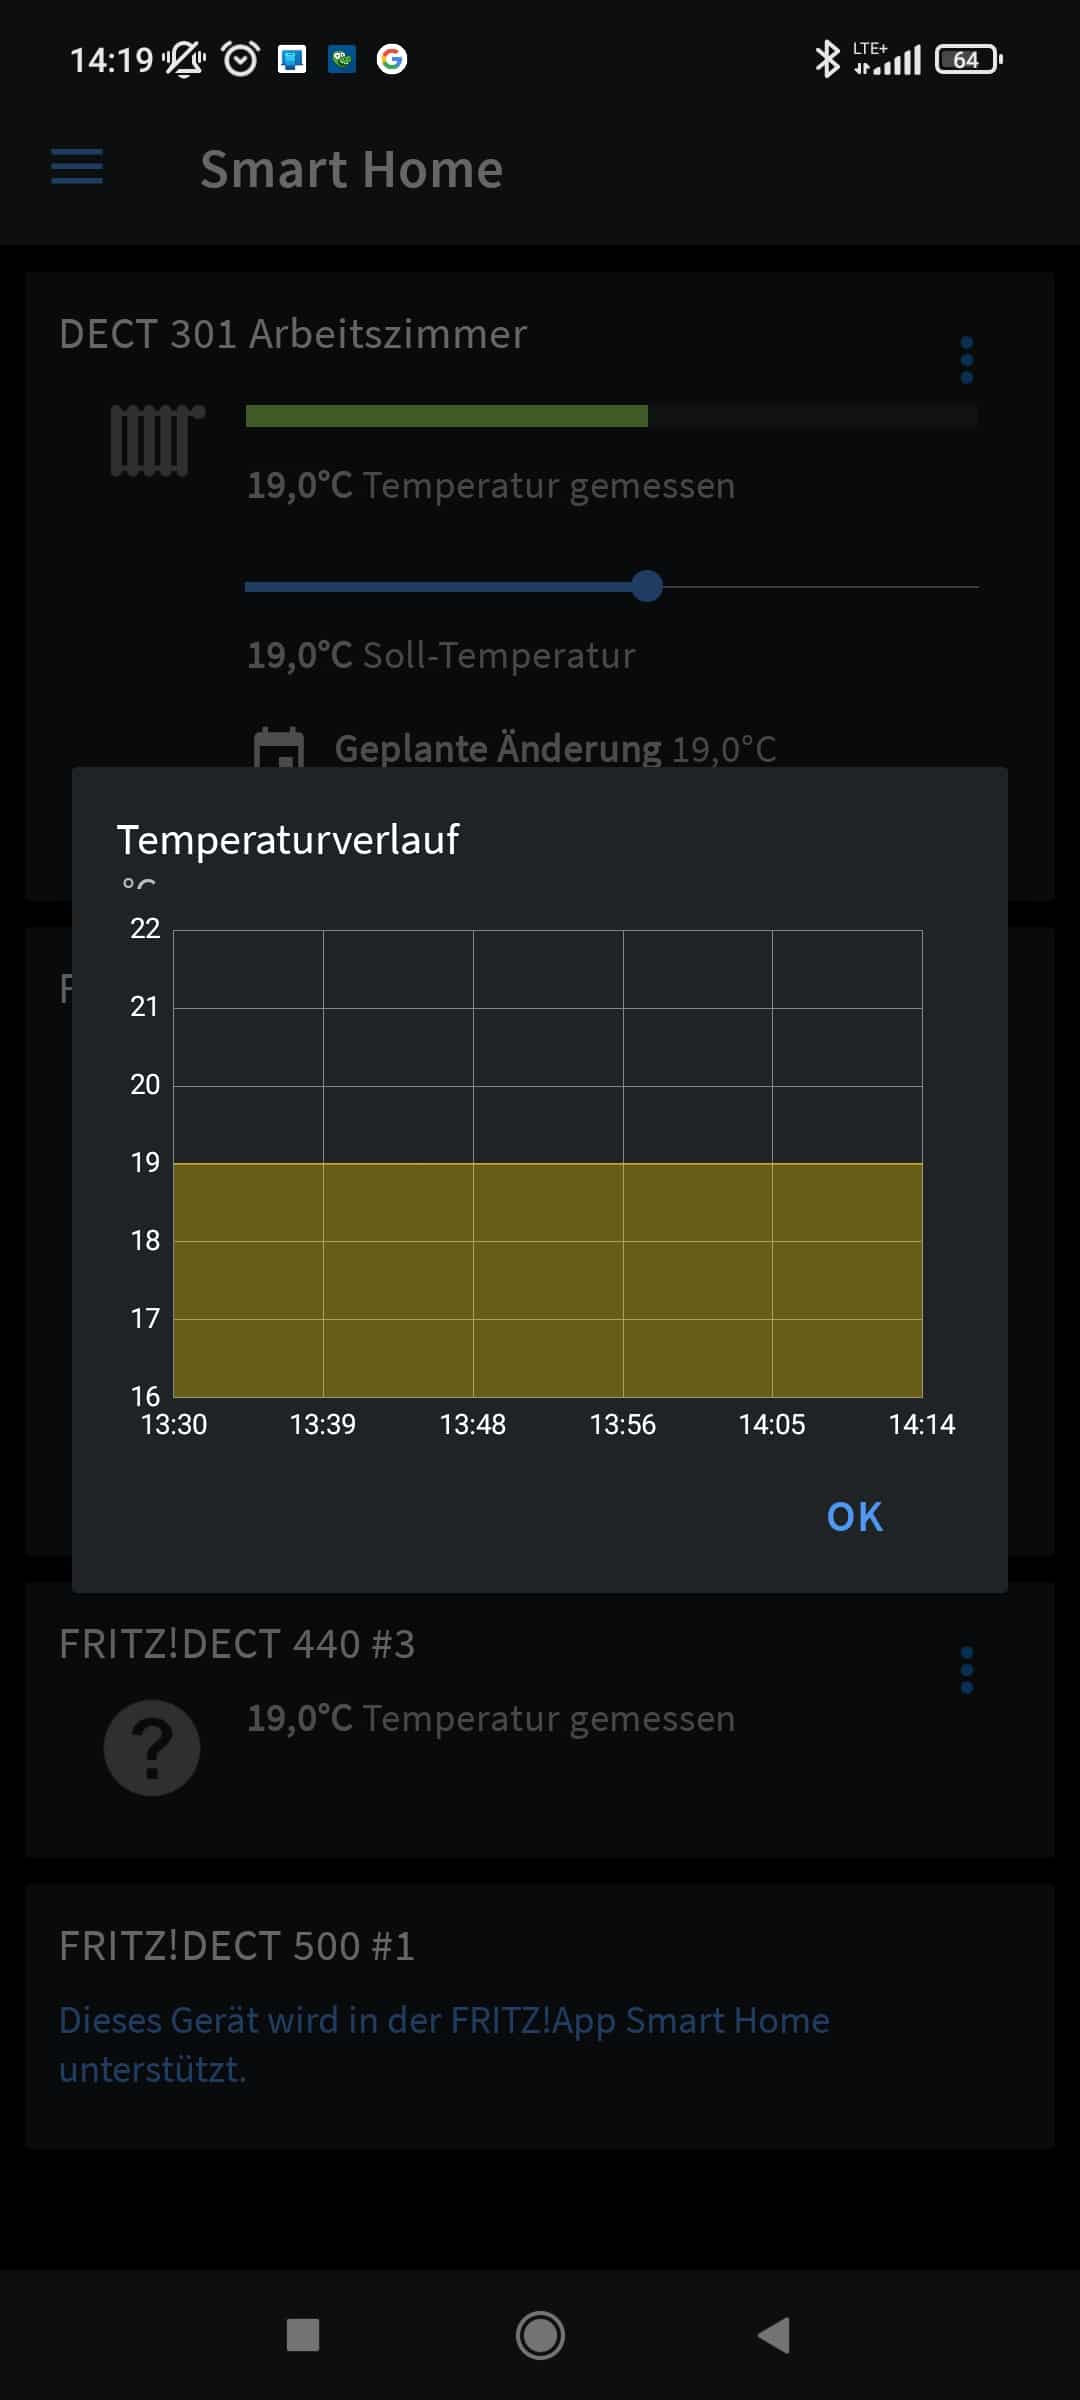 AVM FRITZ!DECT 301 in test - entry into the smart thermostats